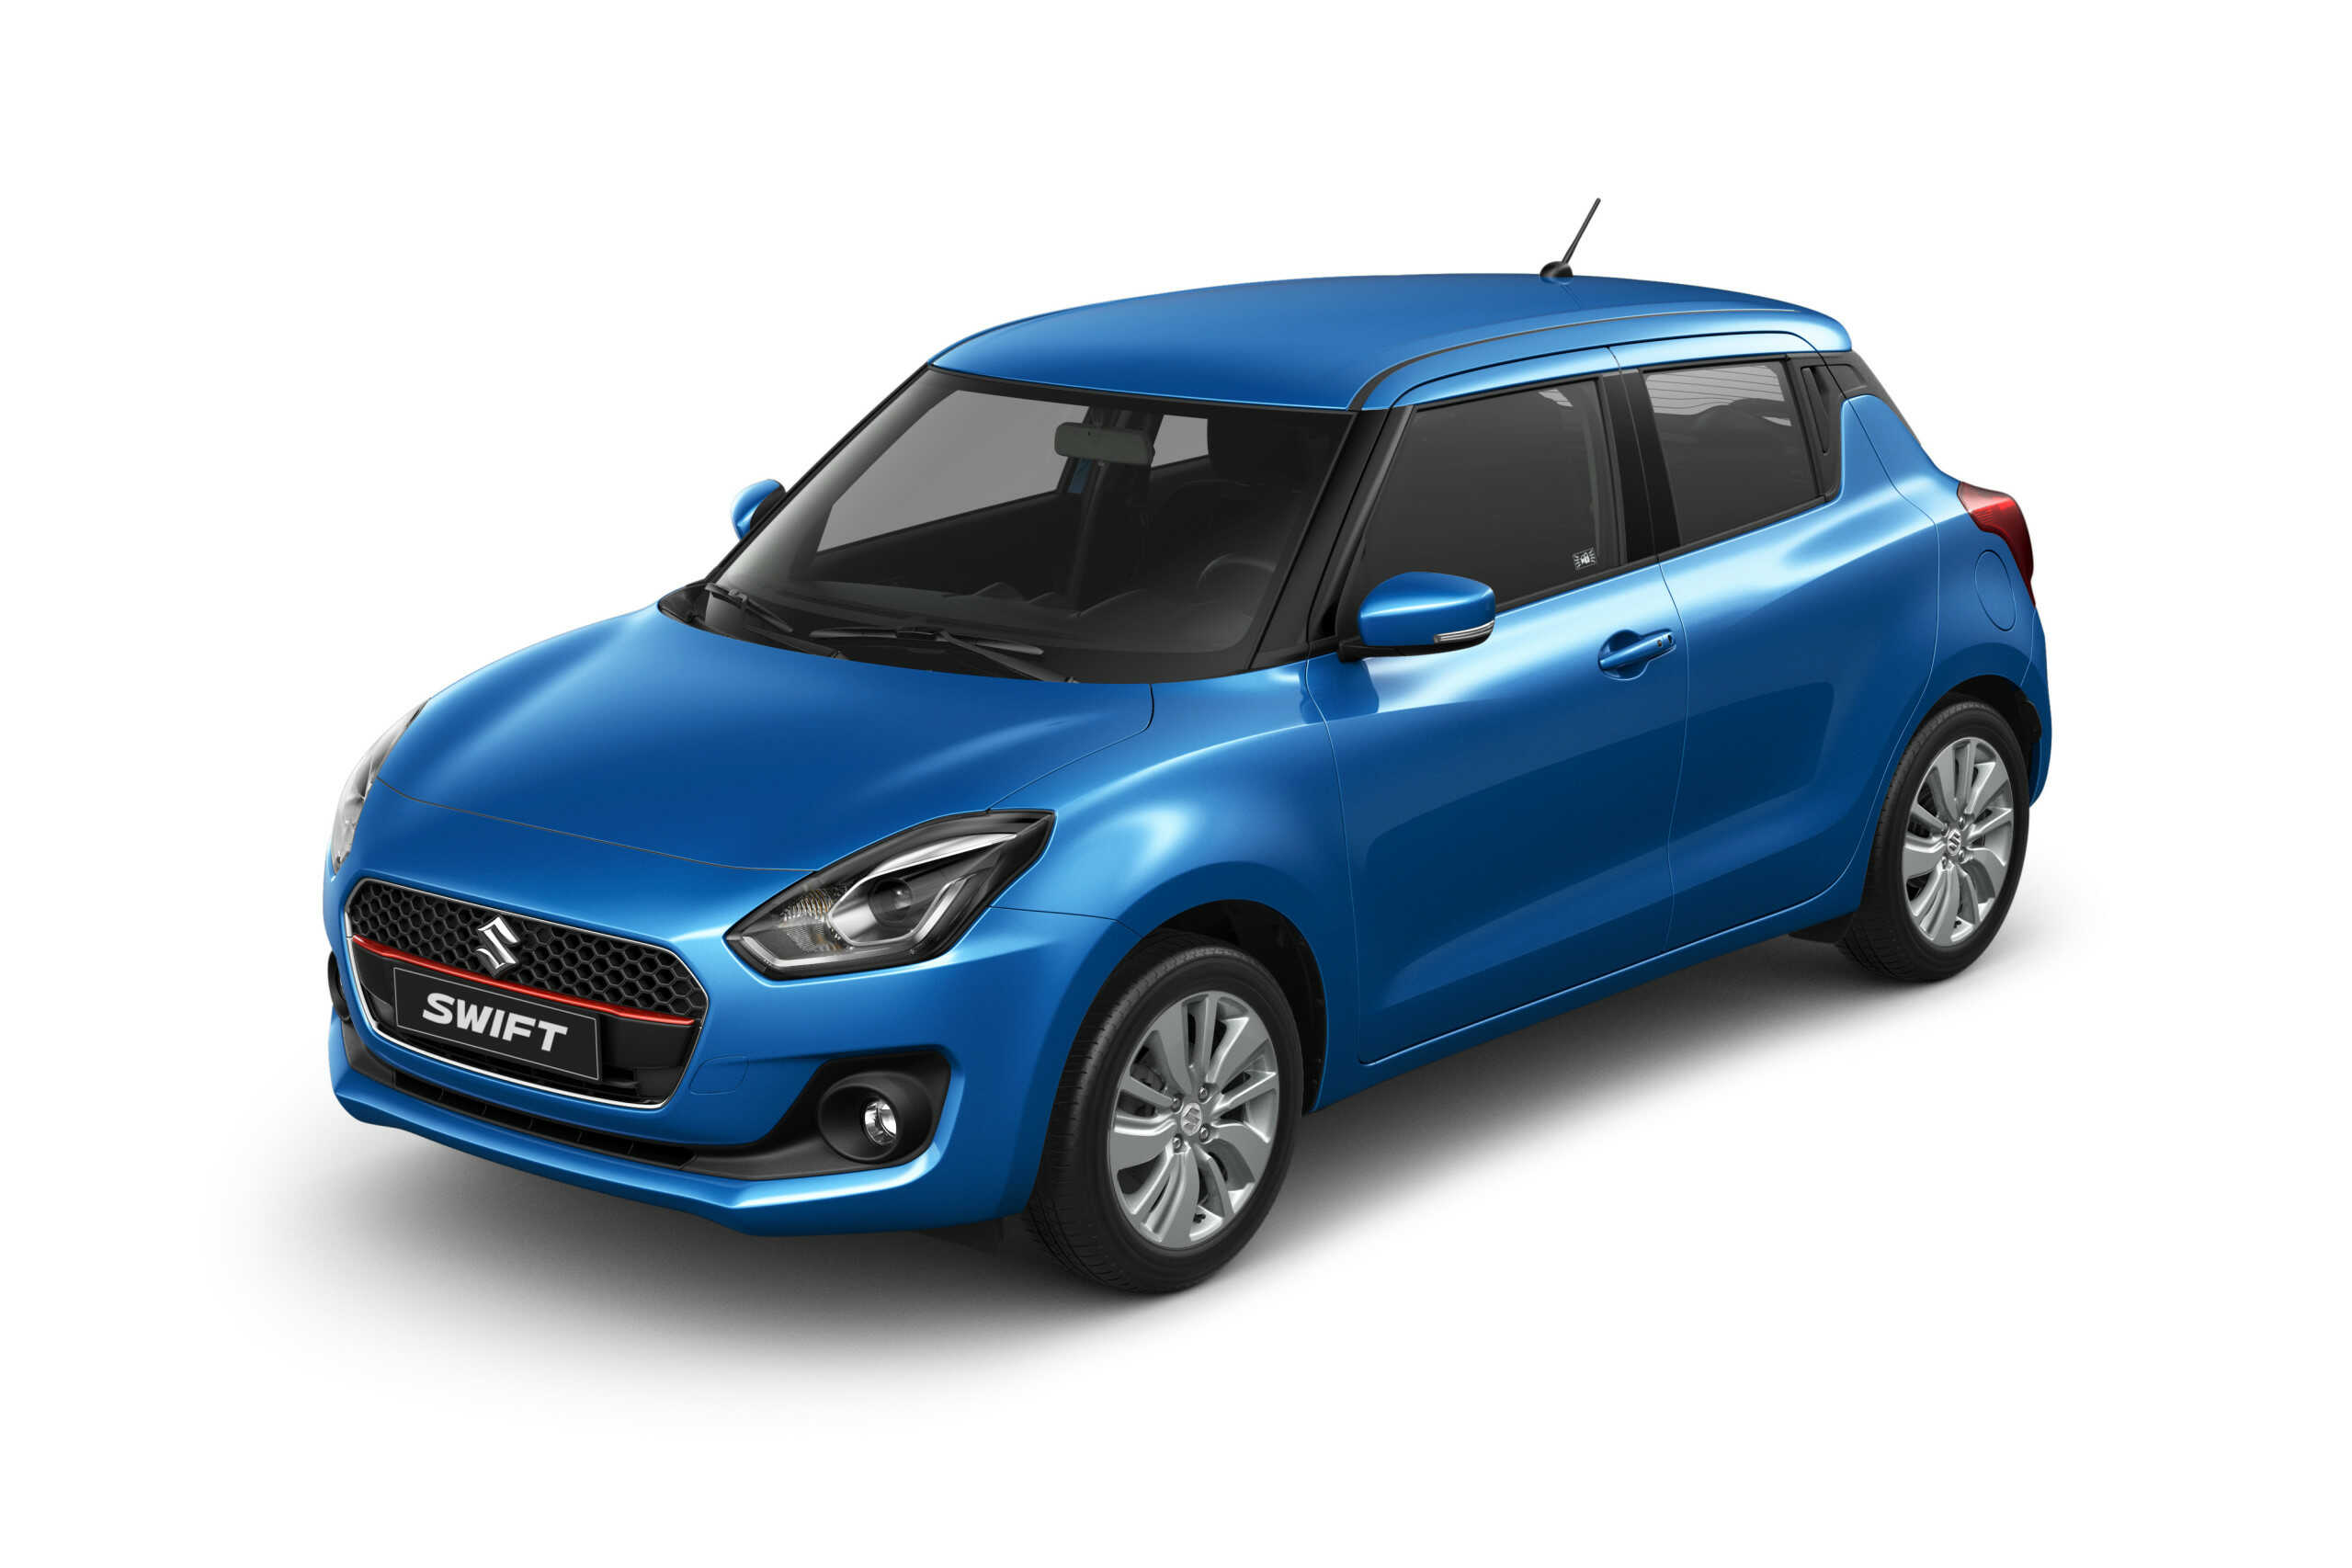 New Suzuki Swift 2017  Price specs release date and pictures   Expresscouk